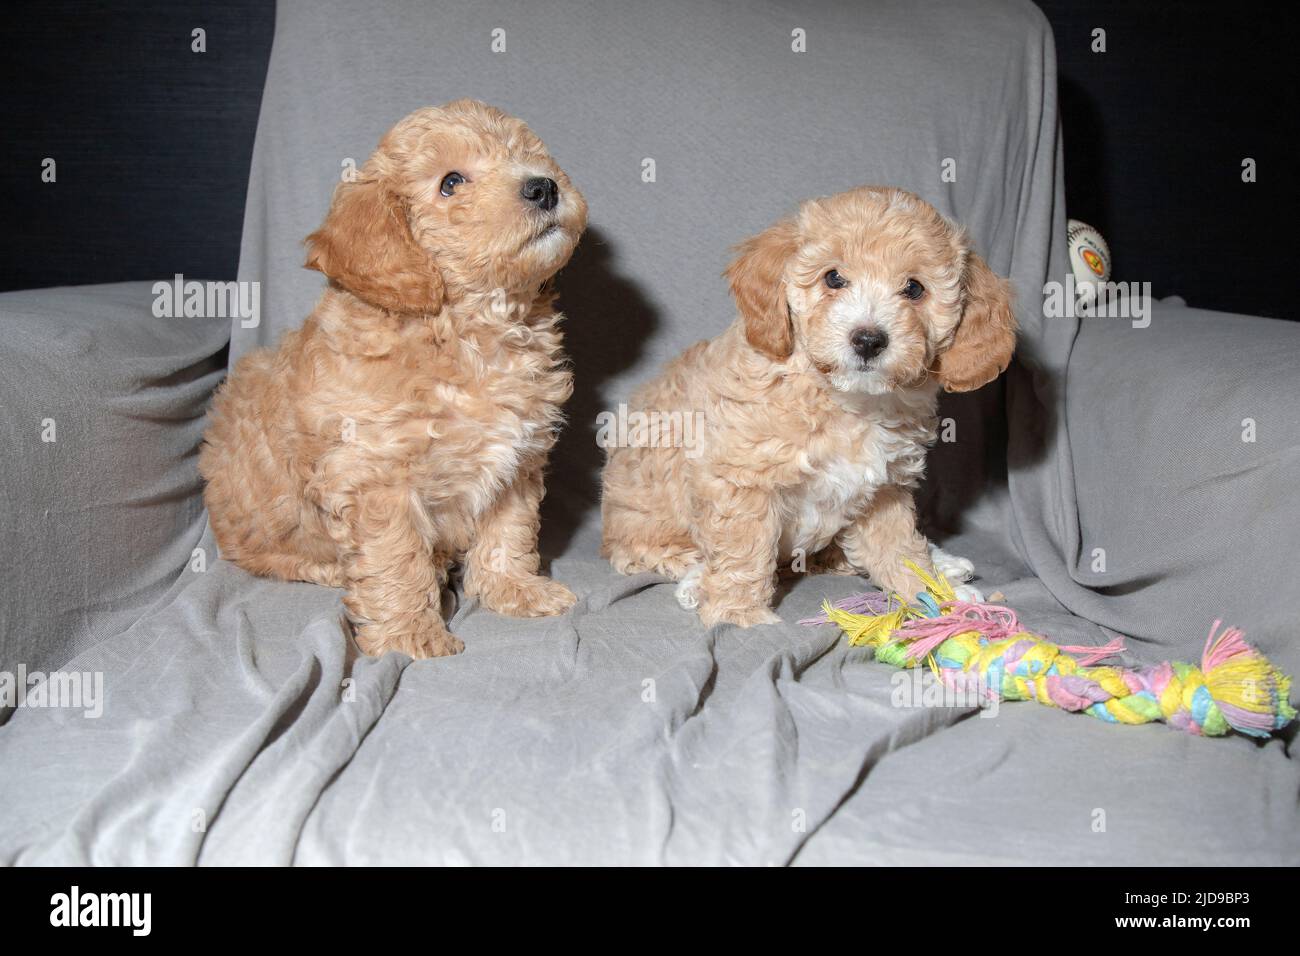 Seven-week-old Poochon (Poodle & Bichon mix) puppies playing on an armchair Stock Photo